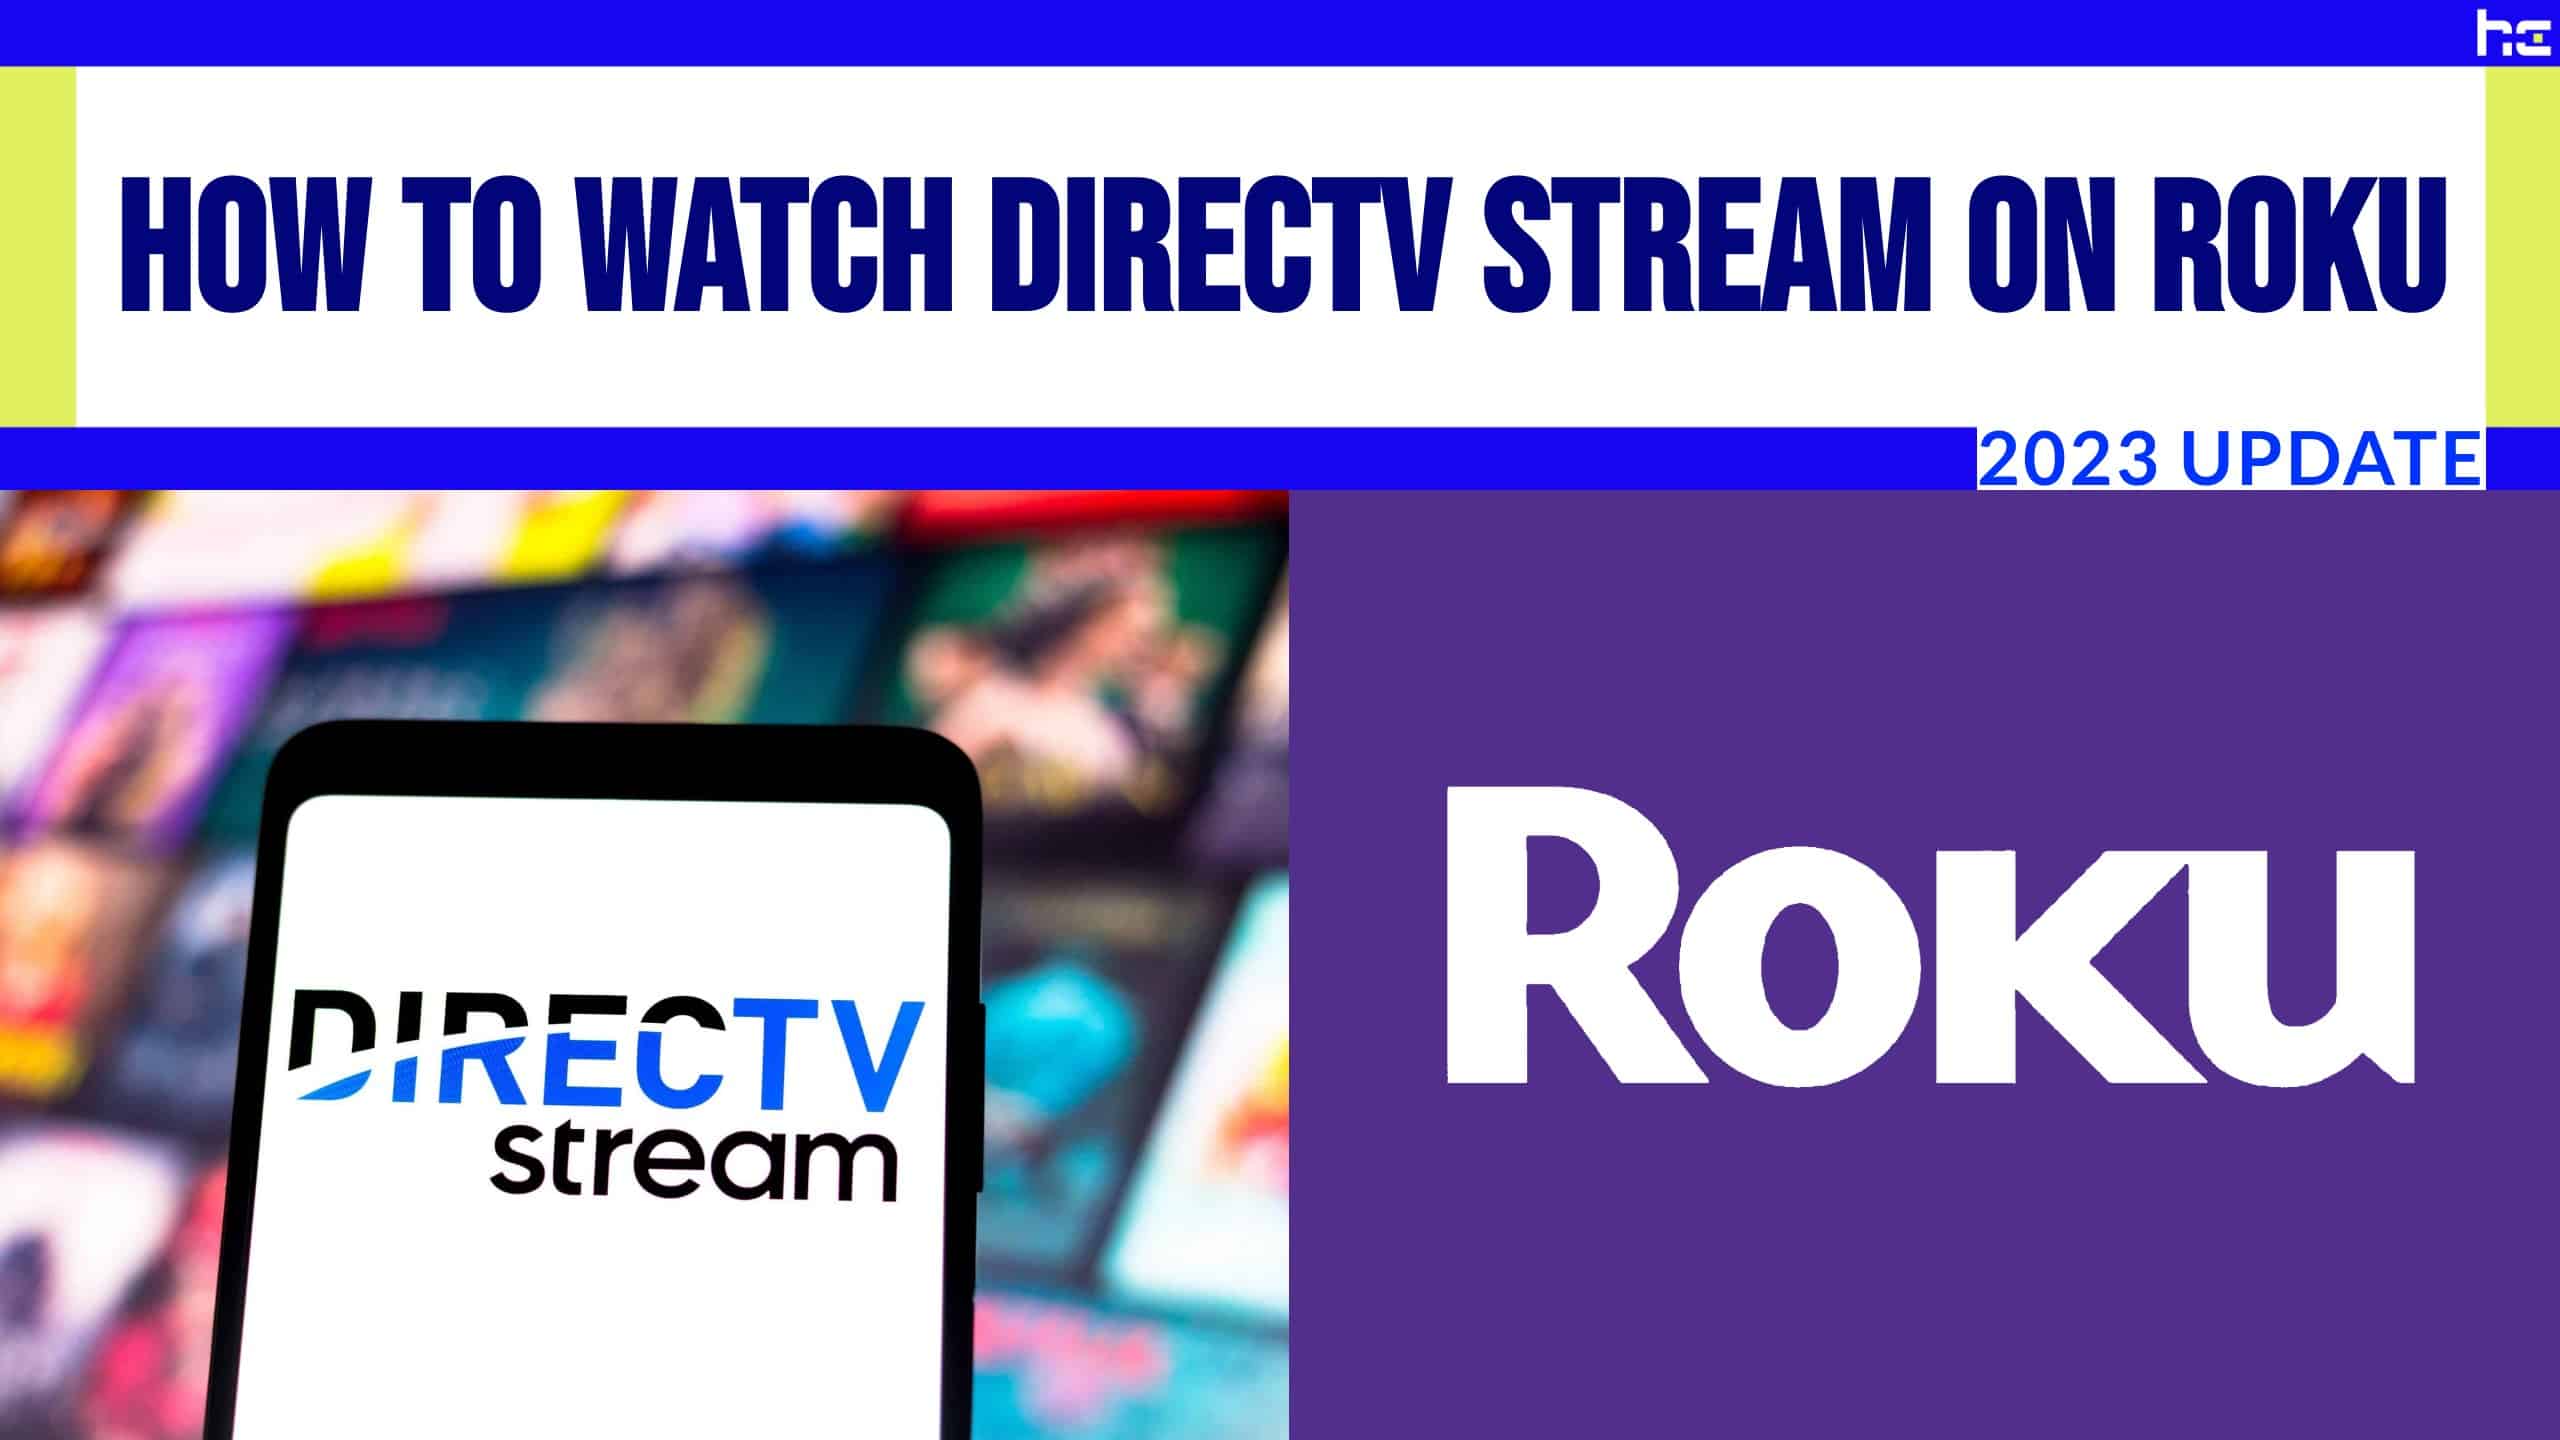 DirecTV and Roku logos side by side.